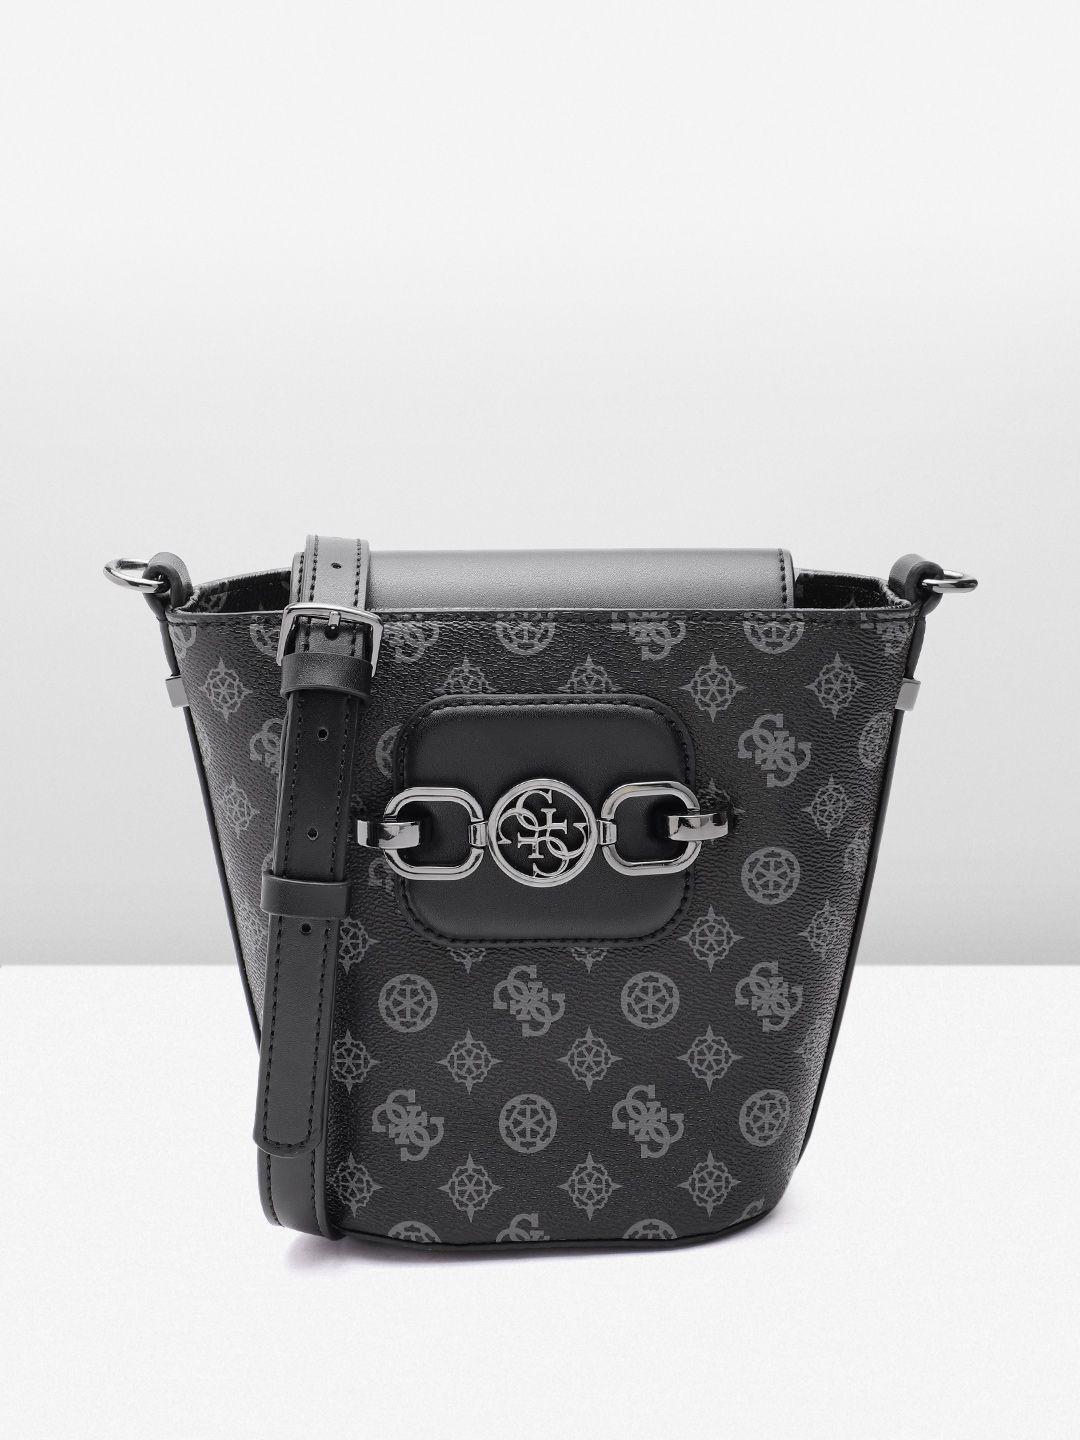 guess brand logo printed structured sling bag